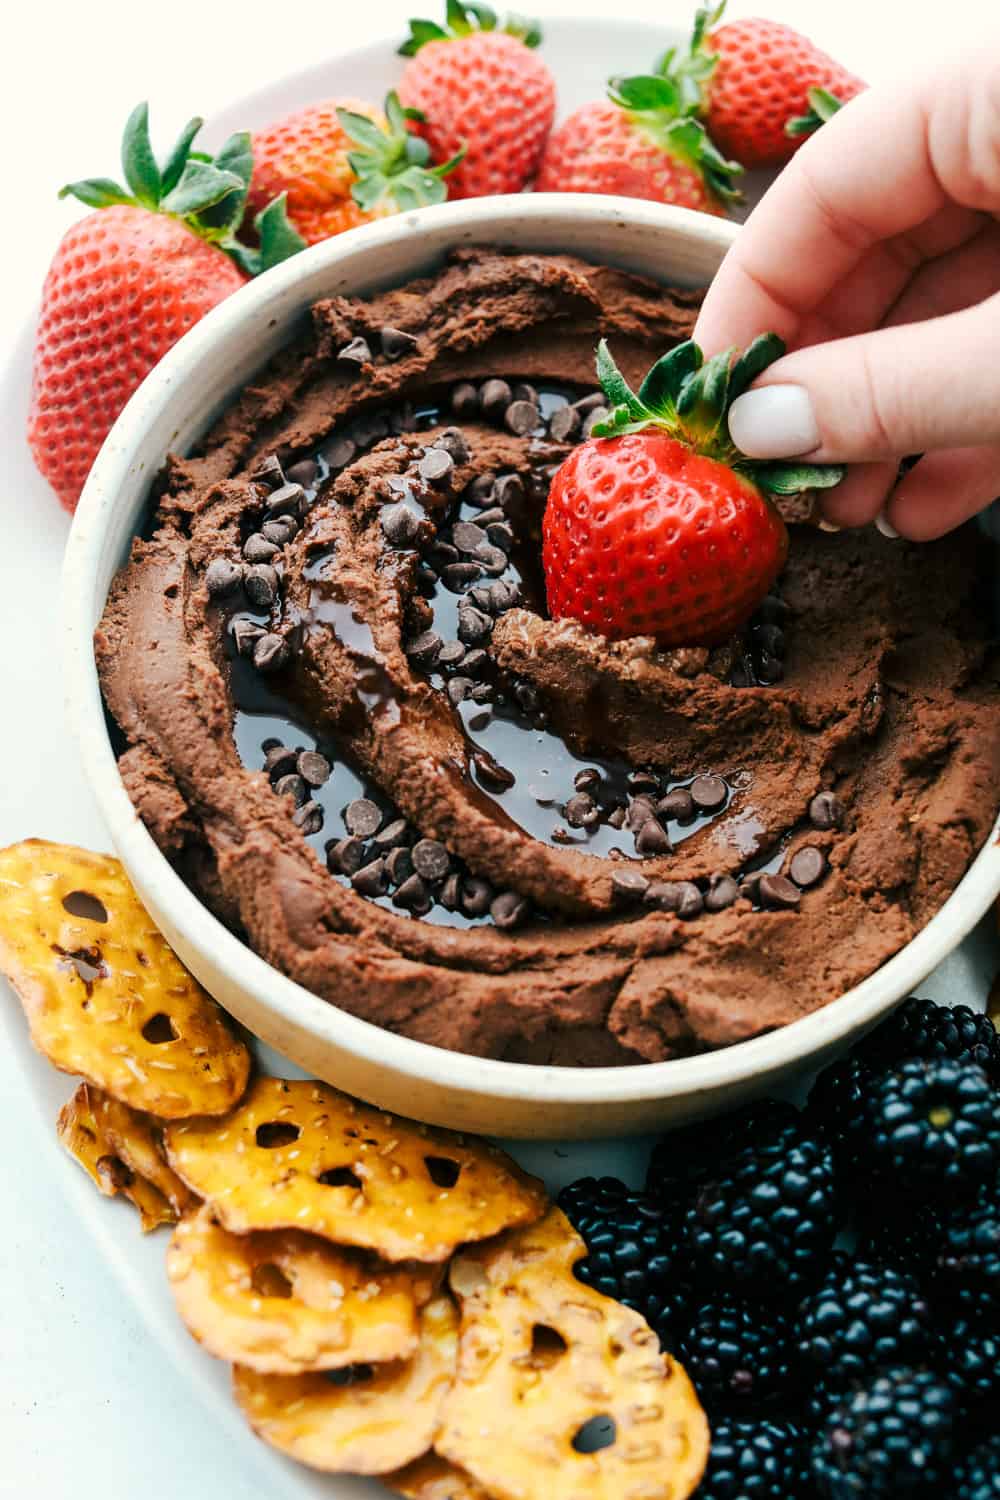 Dipping a strawberry in chocolate hummus garnished with chocolate chips and syrup. 